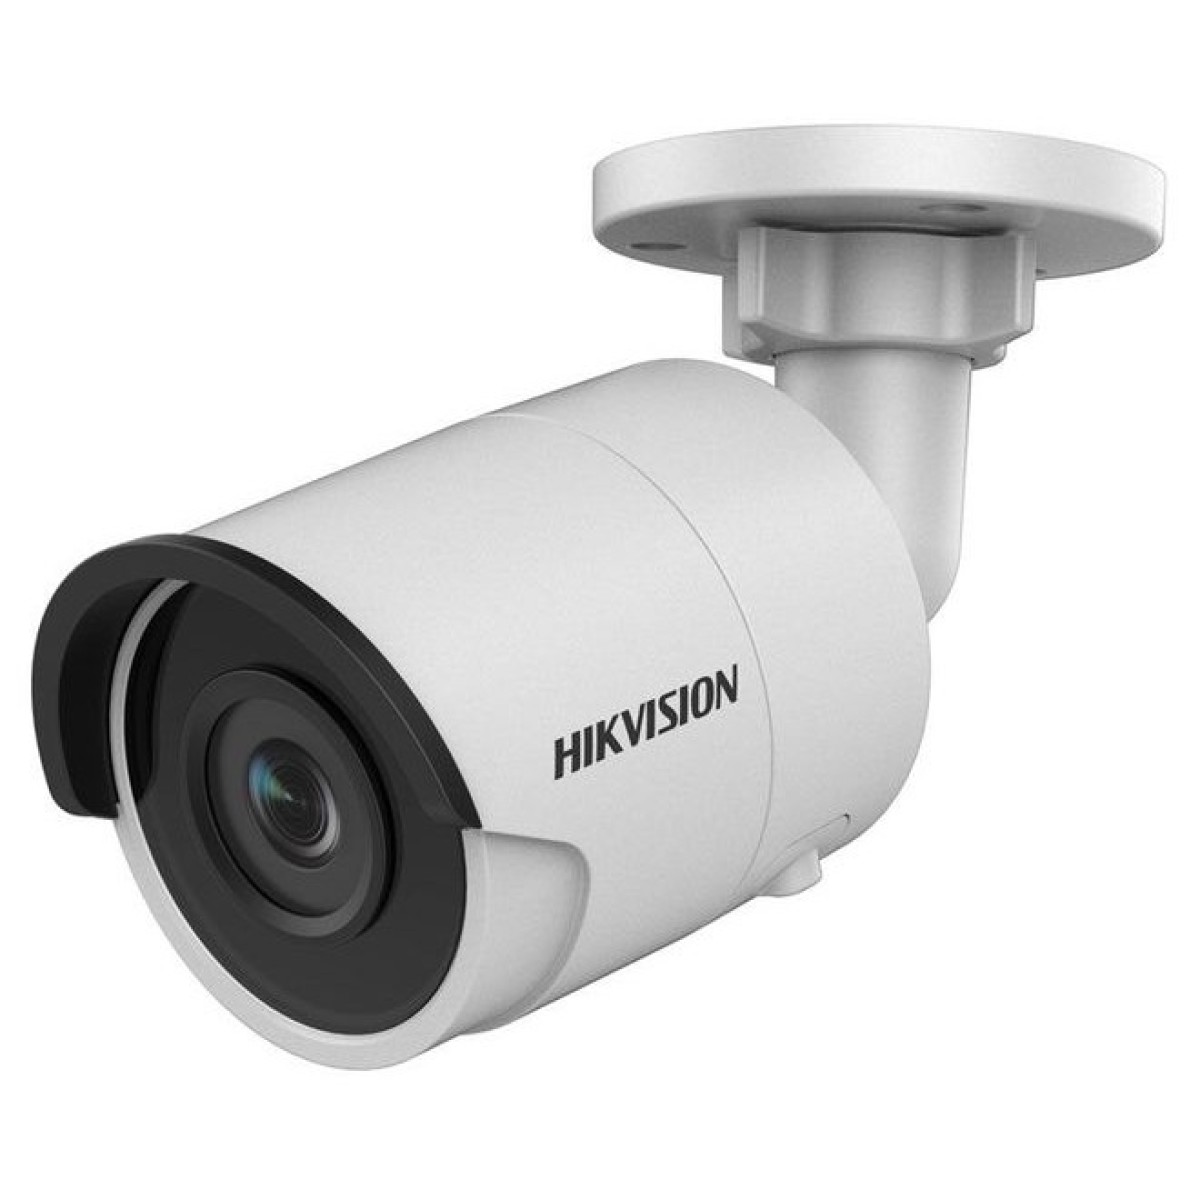 IP-камера Hikvision DS-2CD2055FWD-I (2.8) 98_98.jpg